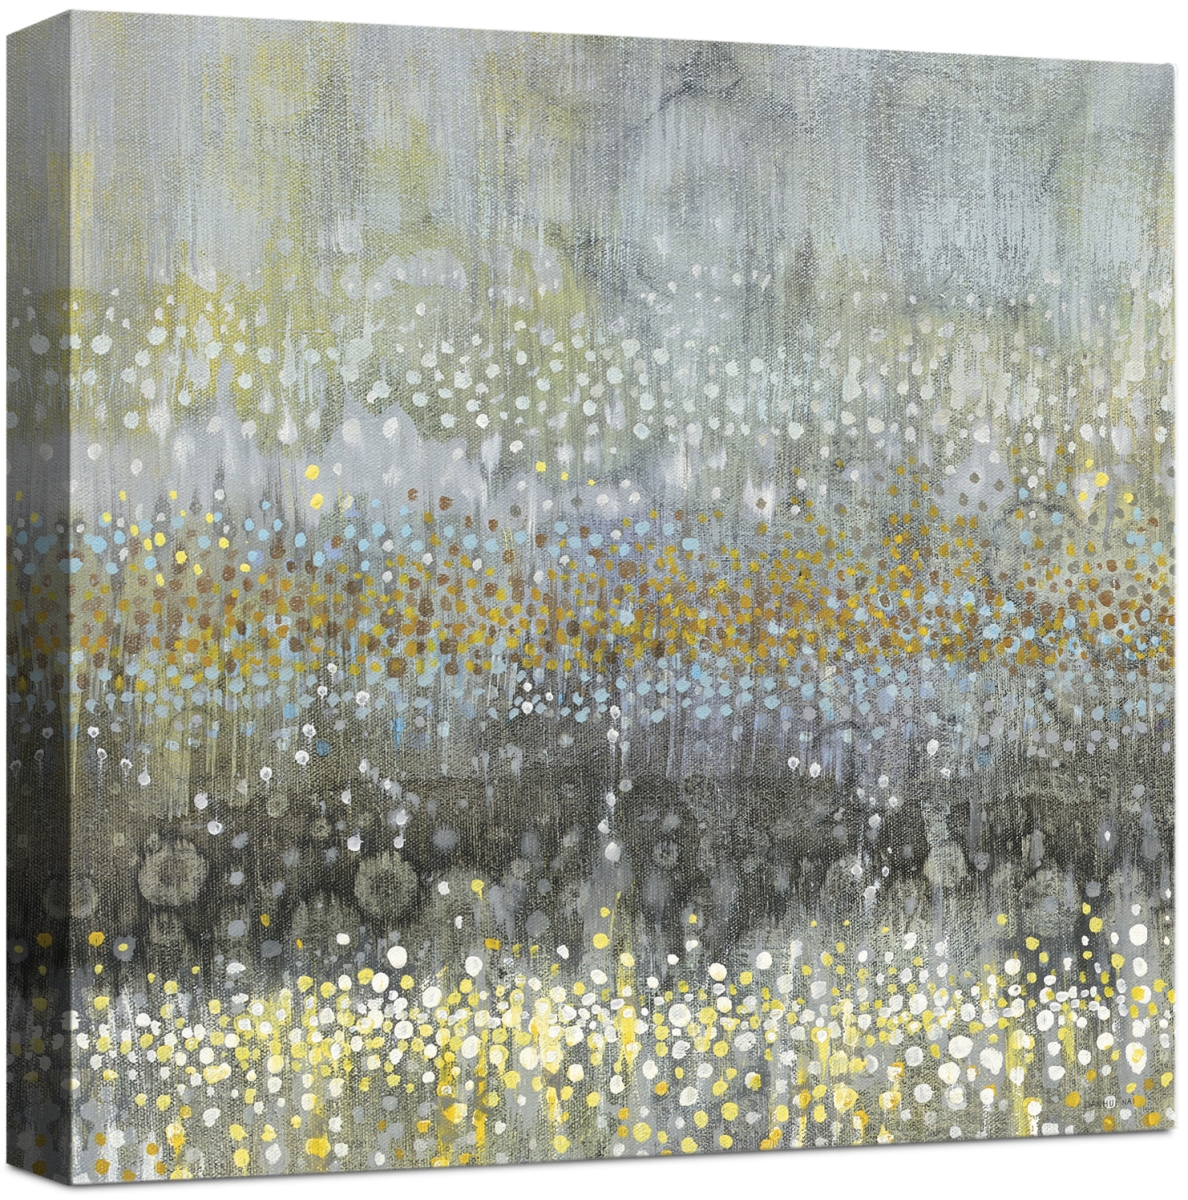 5776 Rain Abstract Iii, Wrapped Giclee Canvas Art - Grey & Gold